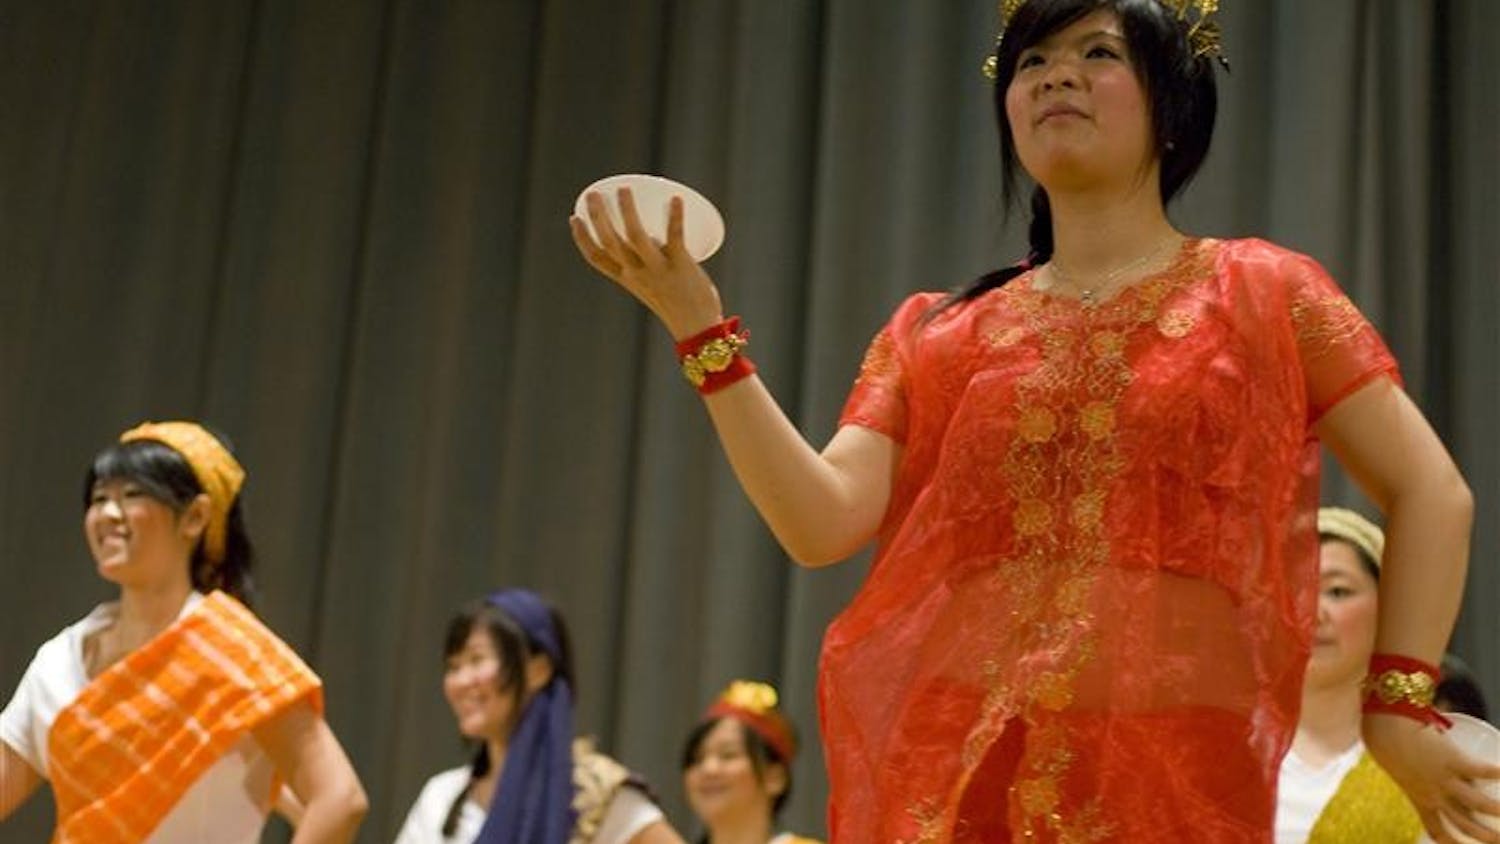 Members of the Indonesian Student Association perform a traditional dance at the IU World's Fare on Thursday night in the IMU Alumni Hall. The World's Fare included several performances and a variety of stations with free food prepared by different student organizations.